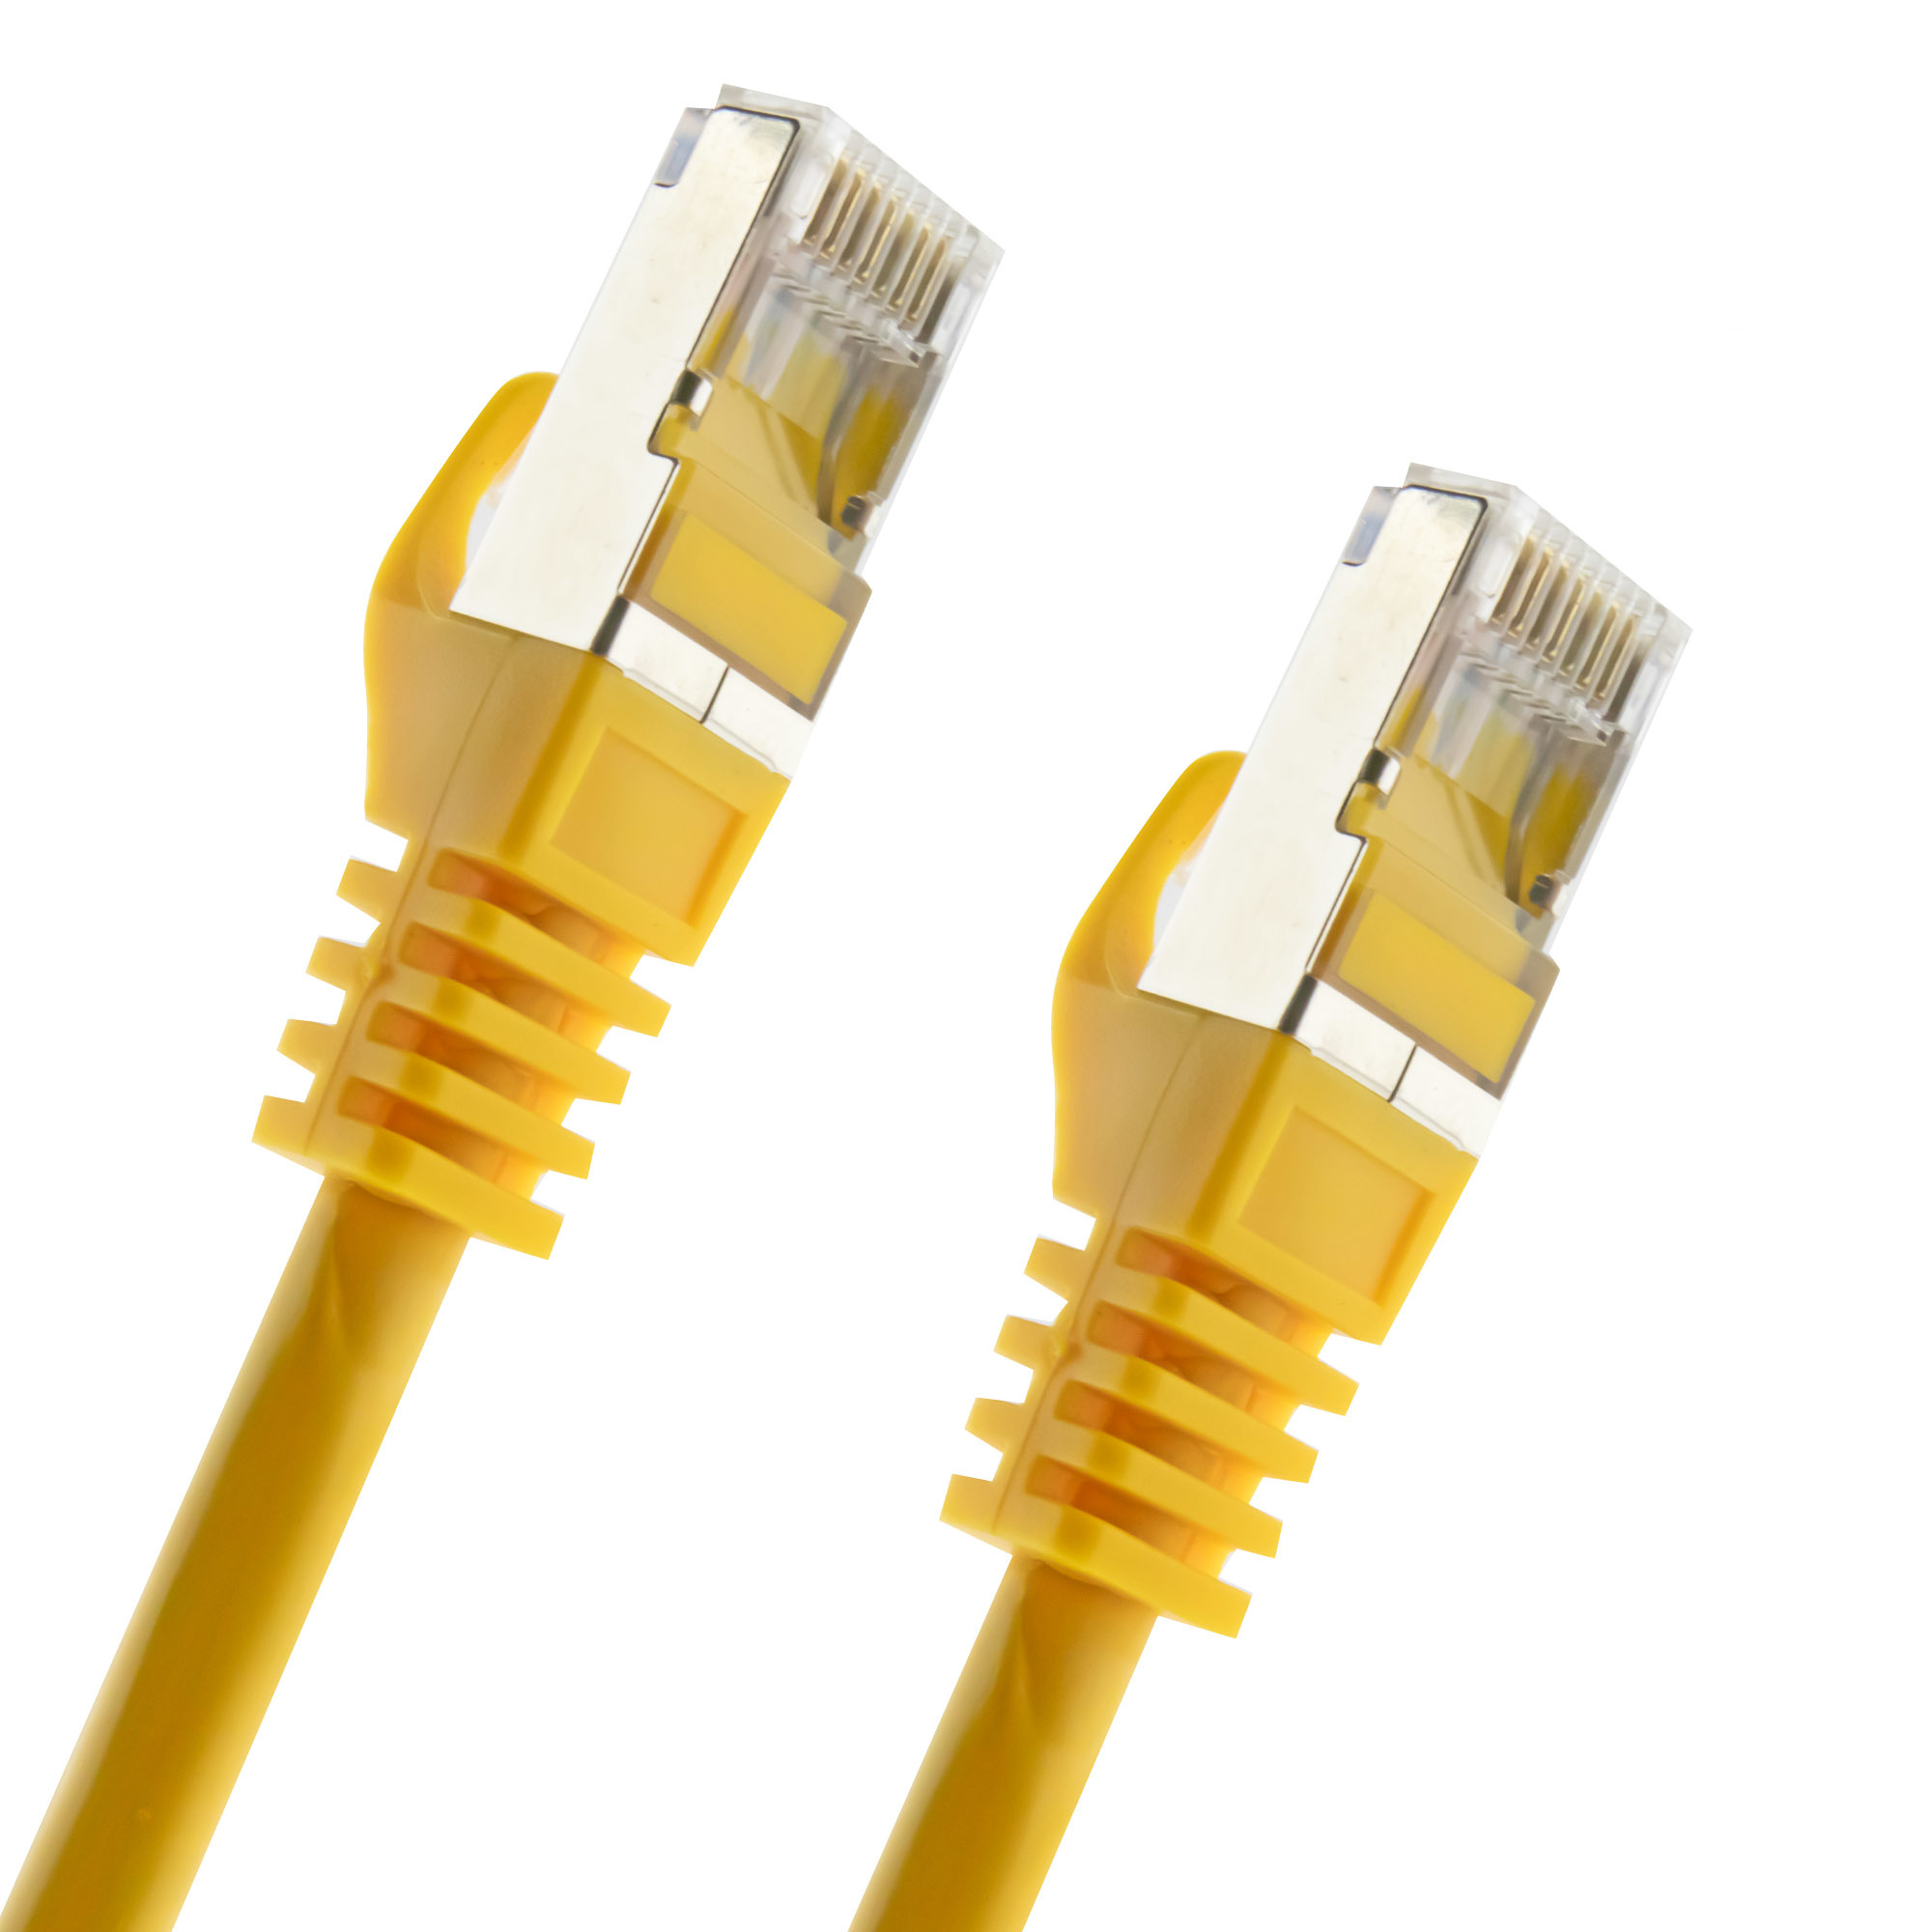 Network cable Cat. 7 S/FTP PIMF 30 meter yellow